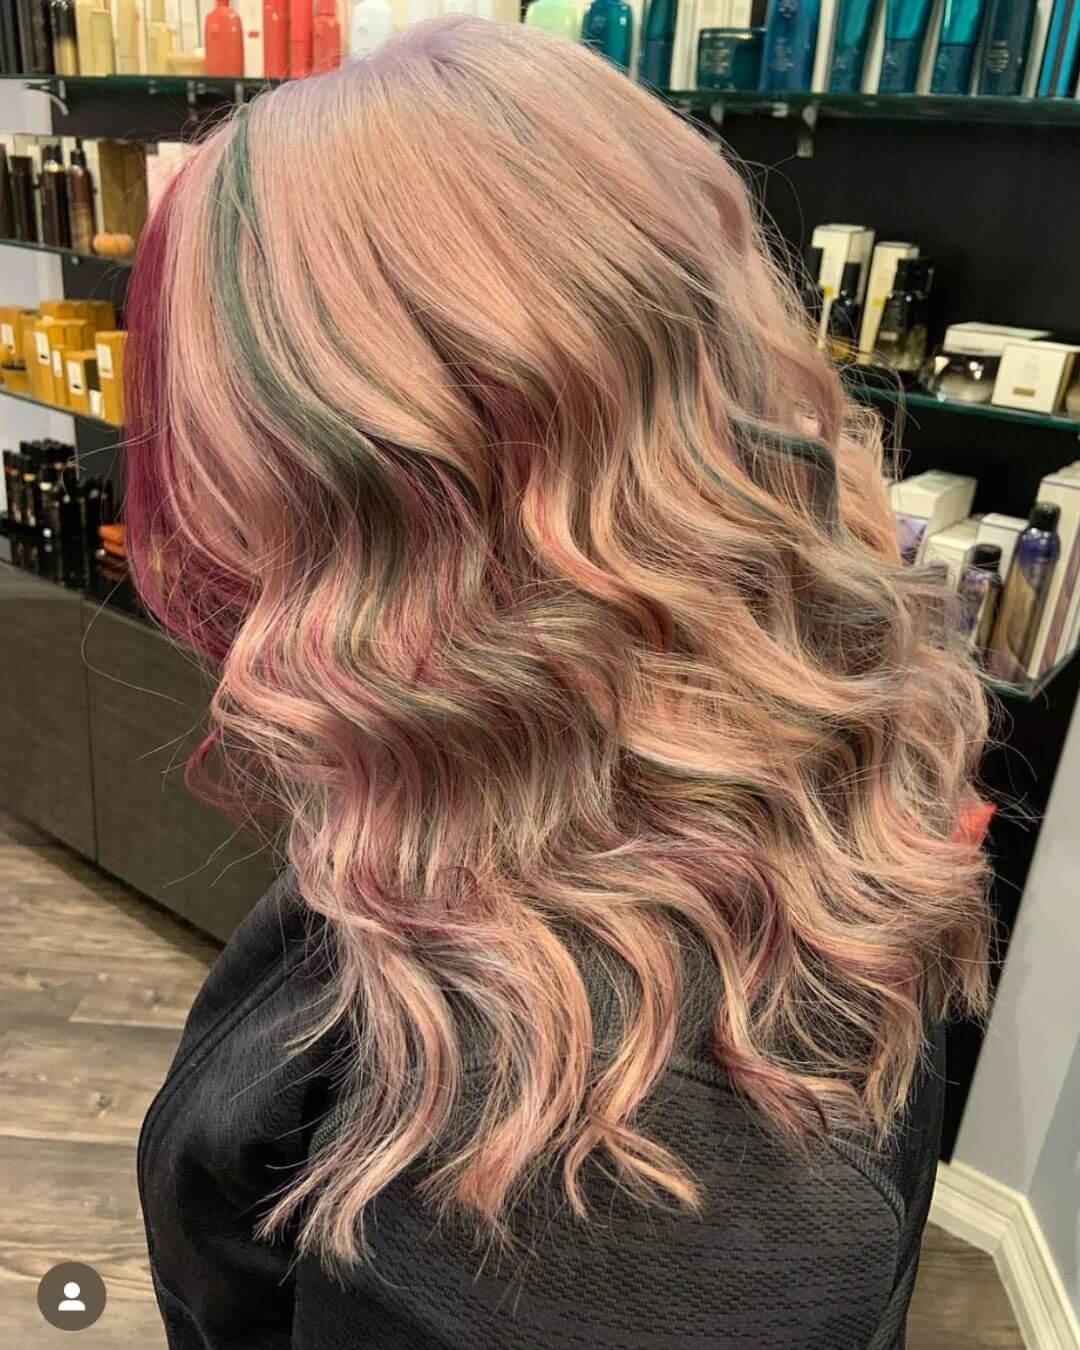 Best Winter Christmas Hair Colors Ideas Pink Blonde Red Green Highlights